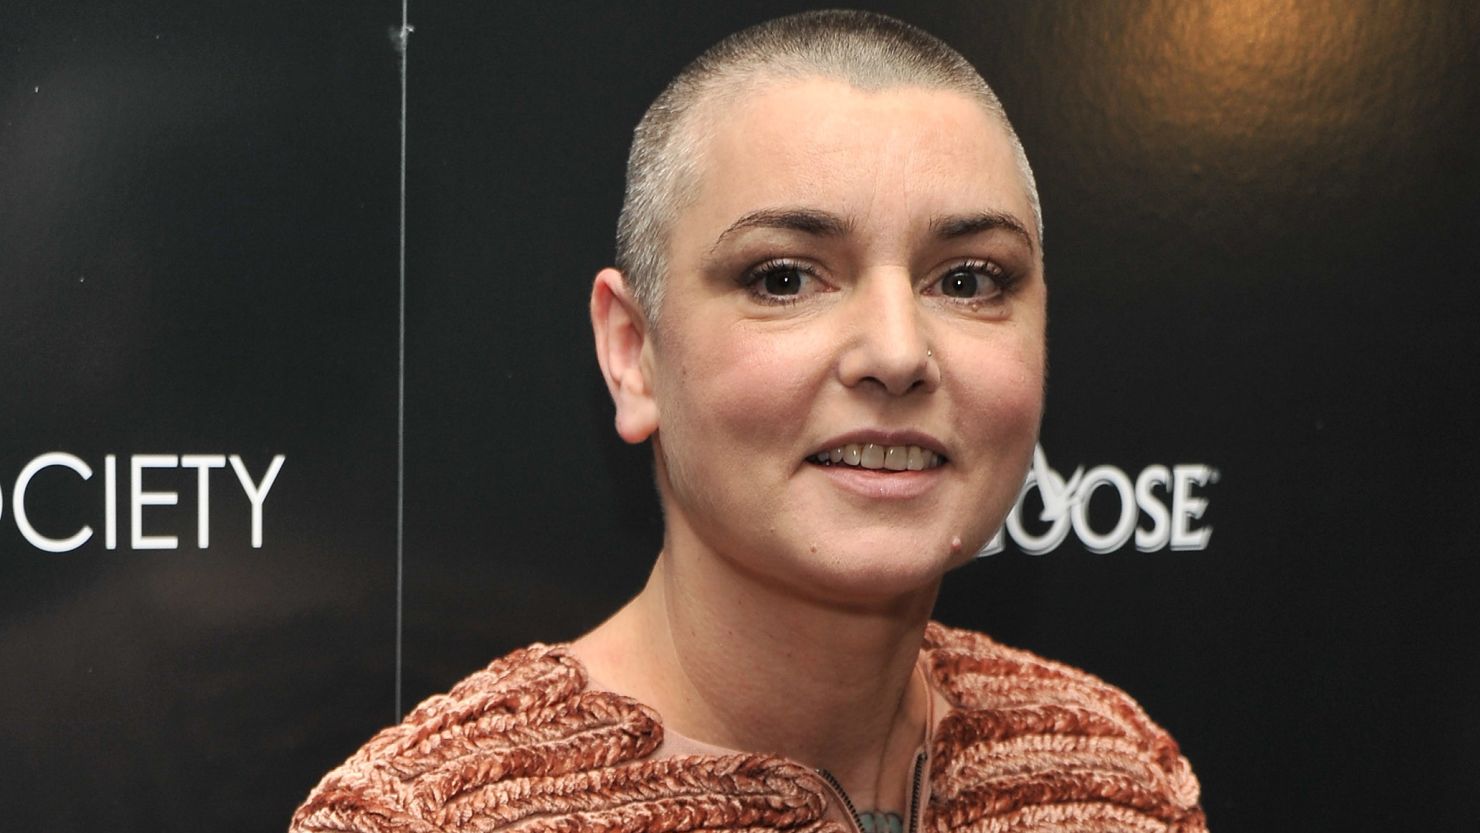 Sinead O'Connor 45, announced her split from Barry Herridge on Monday, 18 days after they tied the knot .